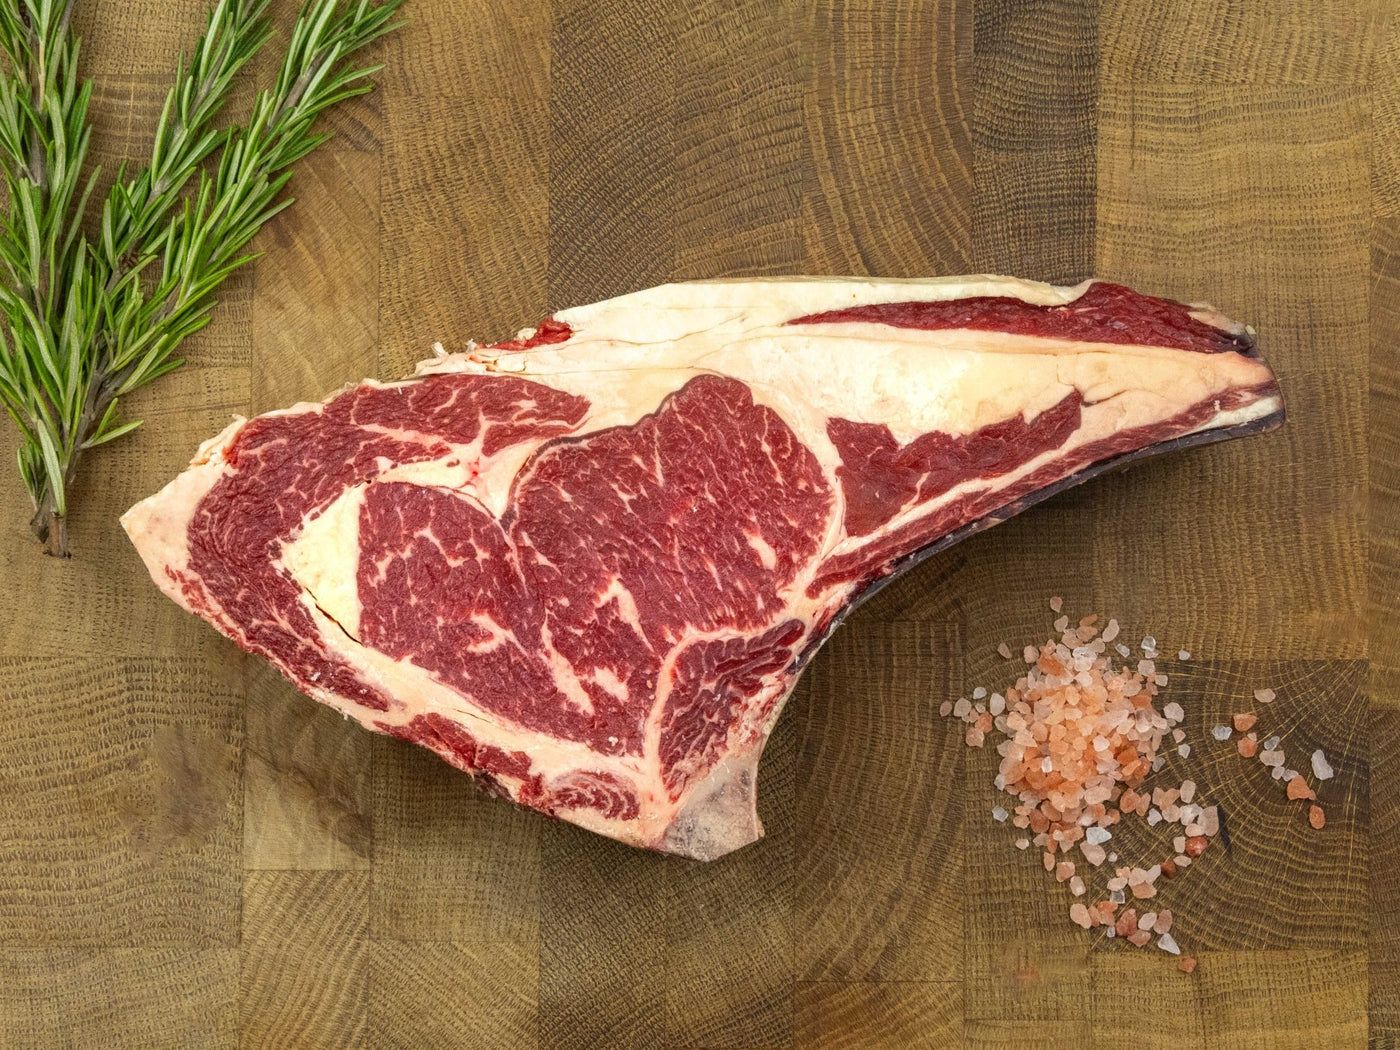 Dry-Aged Galician Prime Steaks - Beef - Thomas Joseph Butchery - Ethical Dry-Aged Meat The Best Steak UK Thomas Joseph Butchery